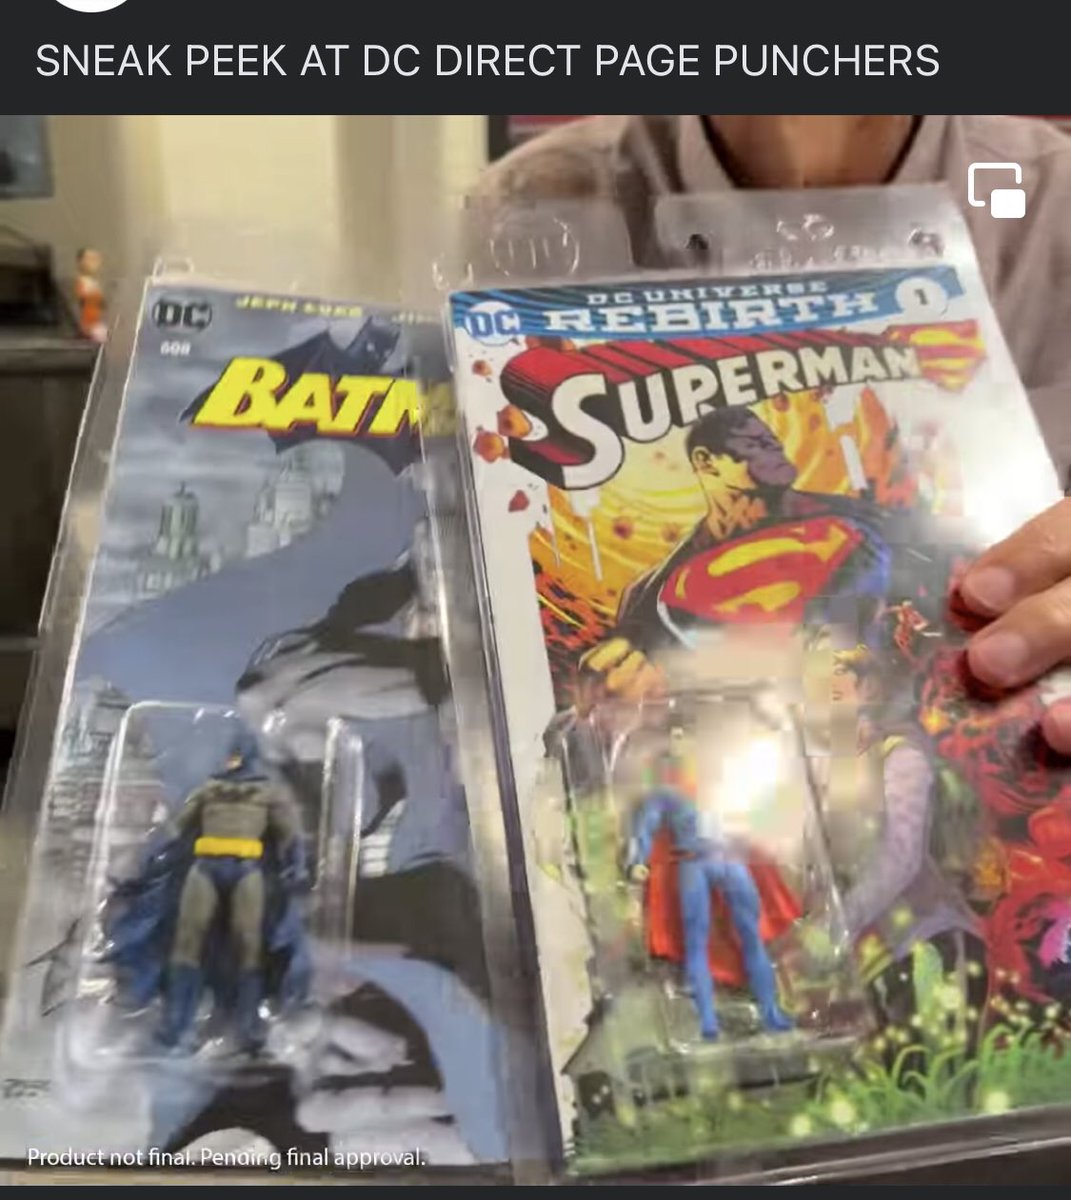 Interesting…not my scale, but great for getting kids or the uninitiated into comics and collecting! #DCComics #DCDirect